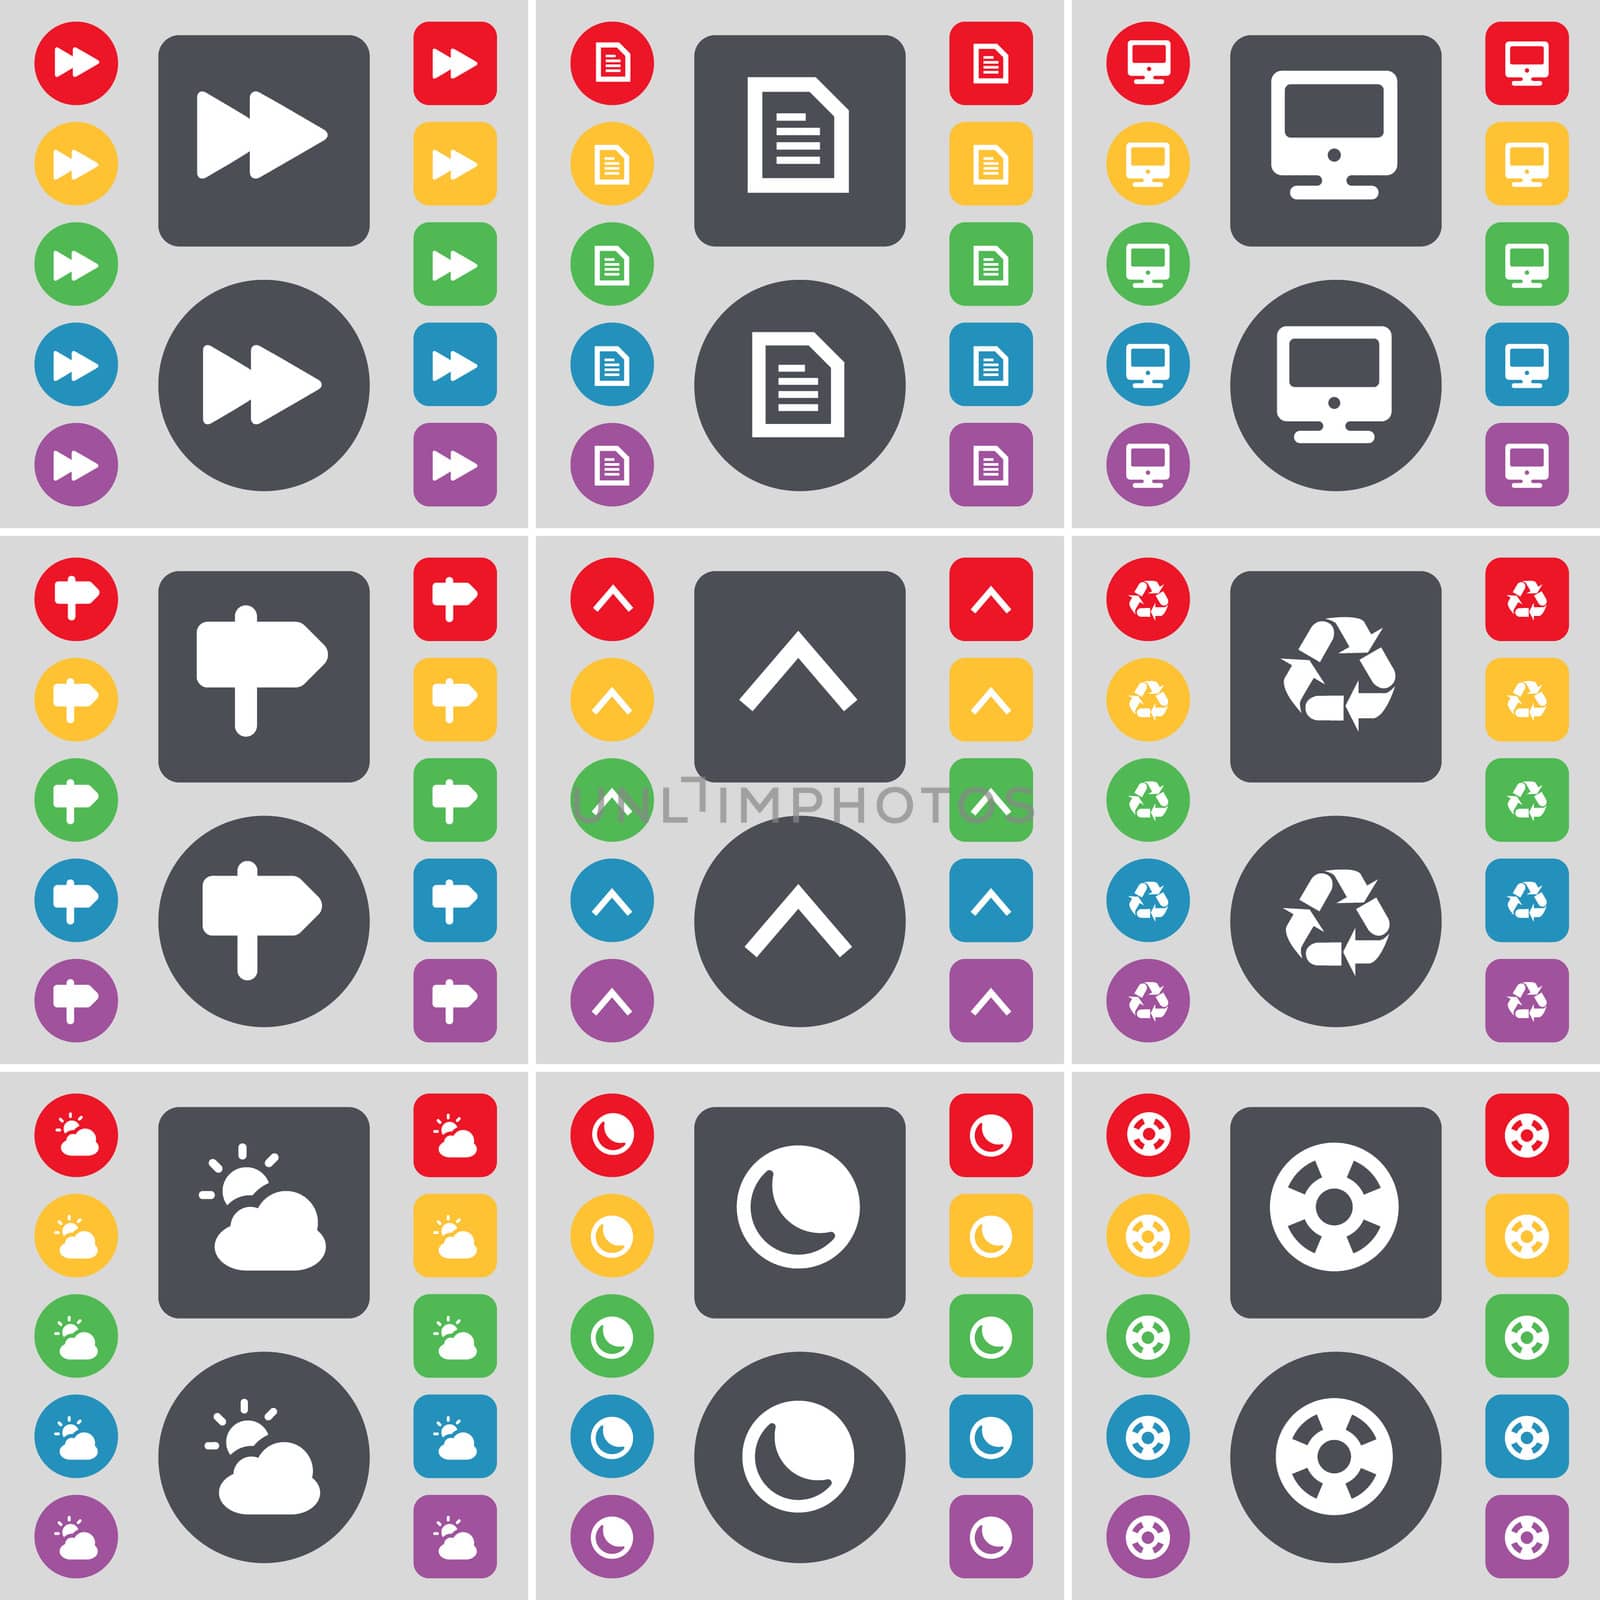 Rewind, Text file, Monitor, Signpost, Arrow up, Recycling, Cloud, Moon, Videotape icon symbol. A large set of flat, colored buttons for your design. illustration